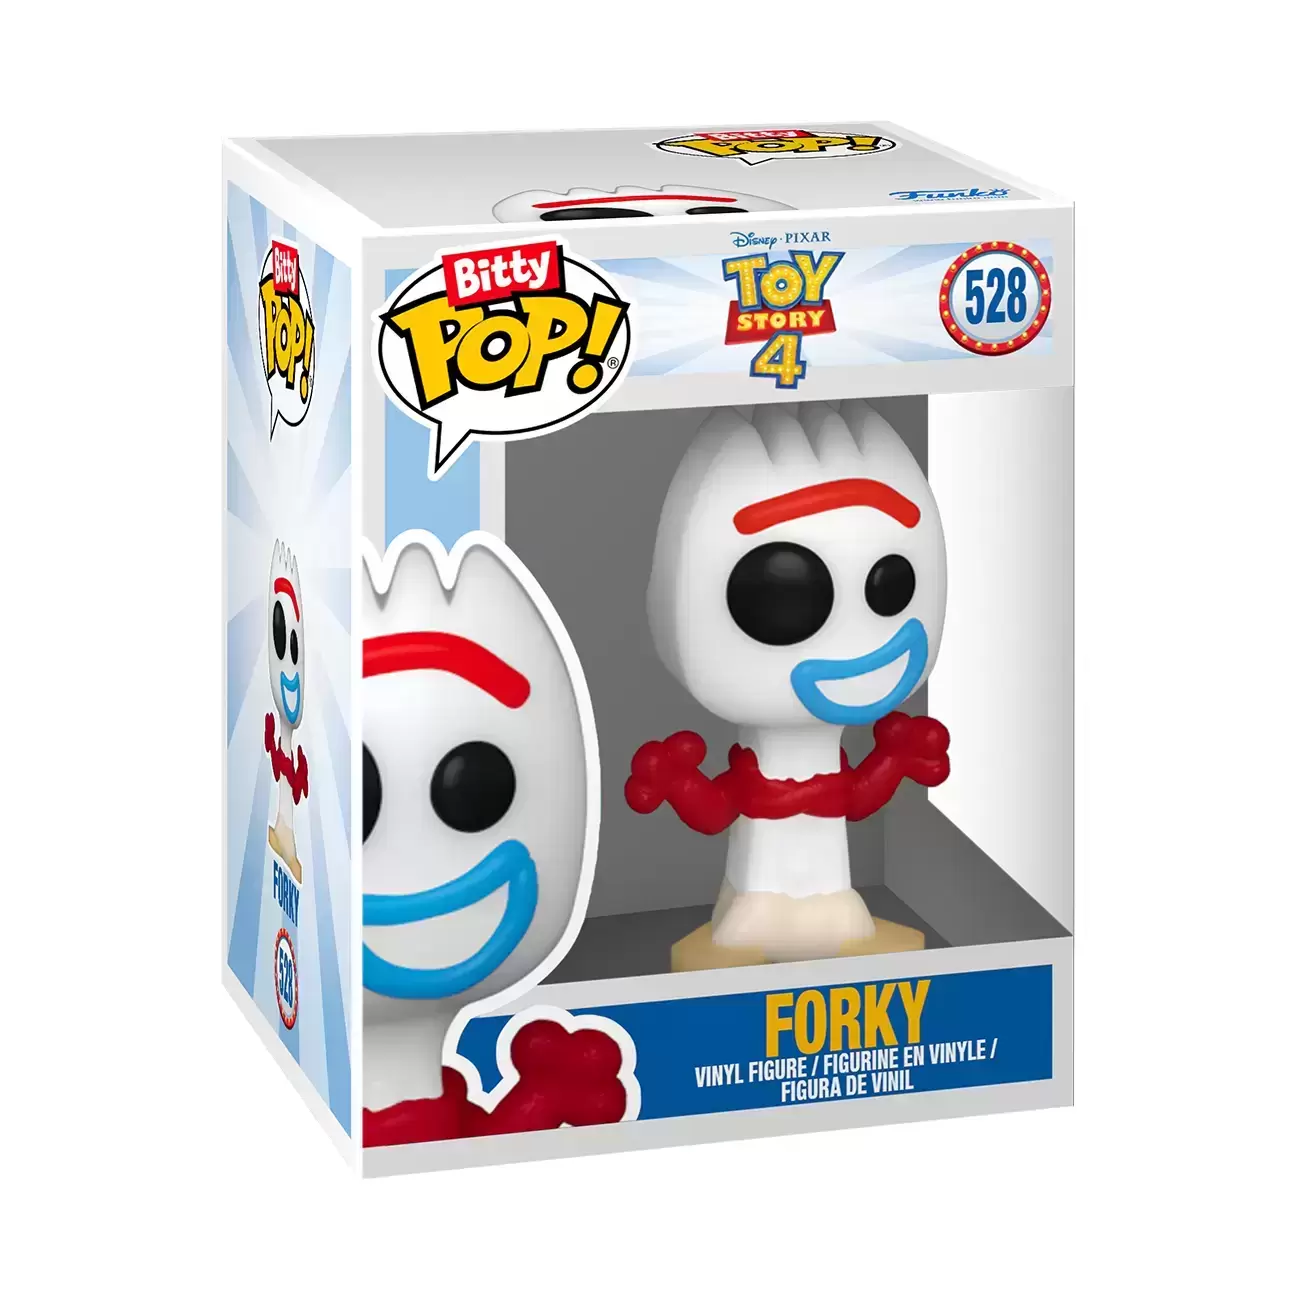 Toy Story - Forky - Bitty POP! action figure 528